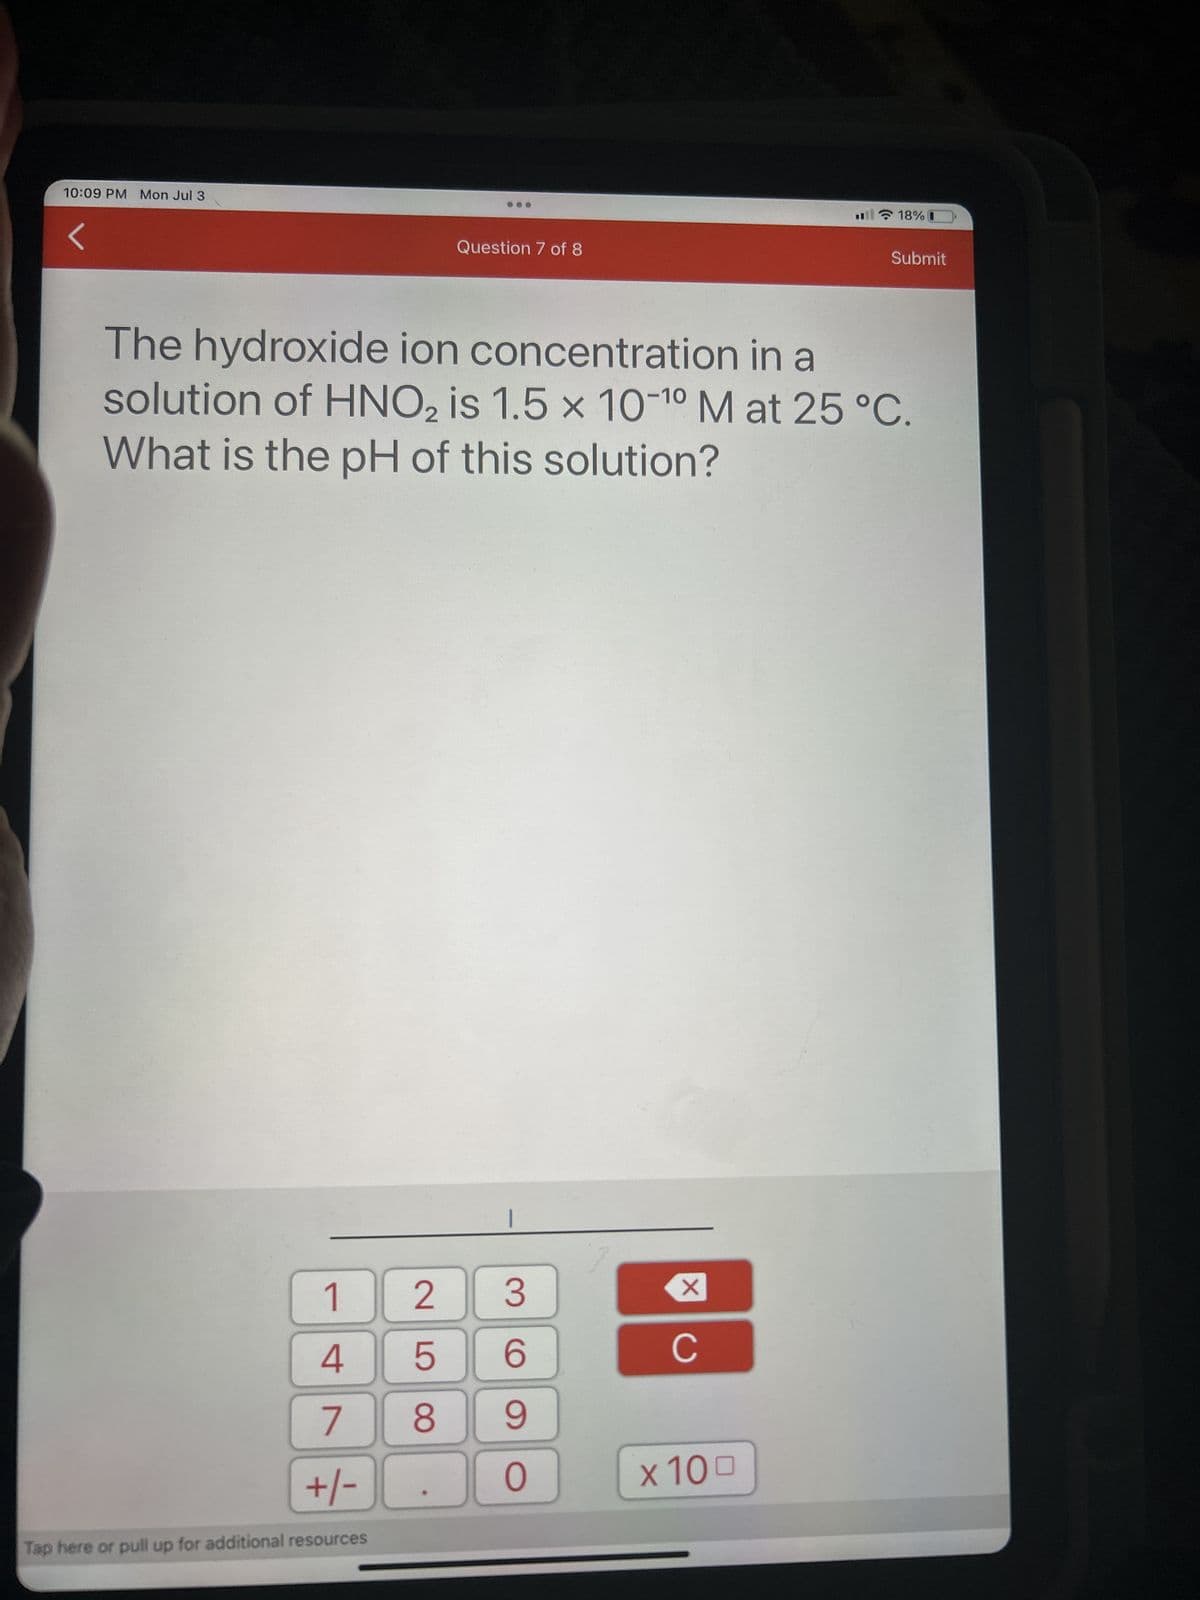 10:09 PM Mon Jul 3
1
4
7
+/-
Tap here or pull up for additional resources
25
Question 7 of 8
The hydroxide ion concentration in a
solution of HNO₂ is 1.5 x 10-10 M at 25 °C.
What is the pH of this solution?
8
3
6
9
0
XU
с
18% 0
x 100
Submit